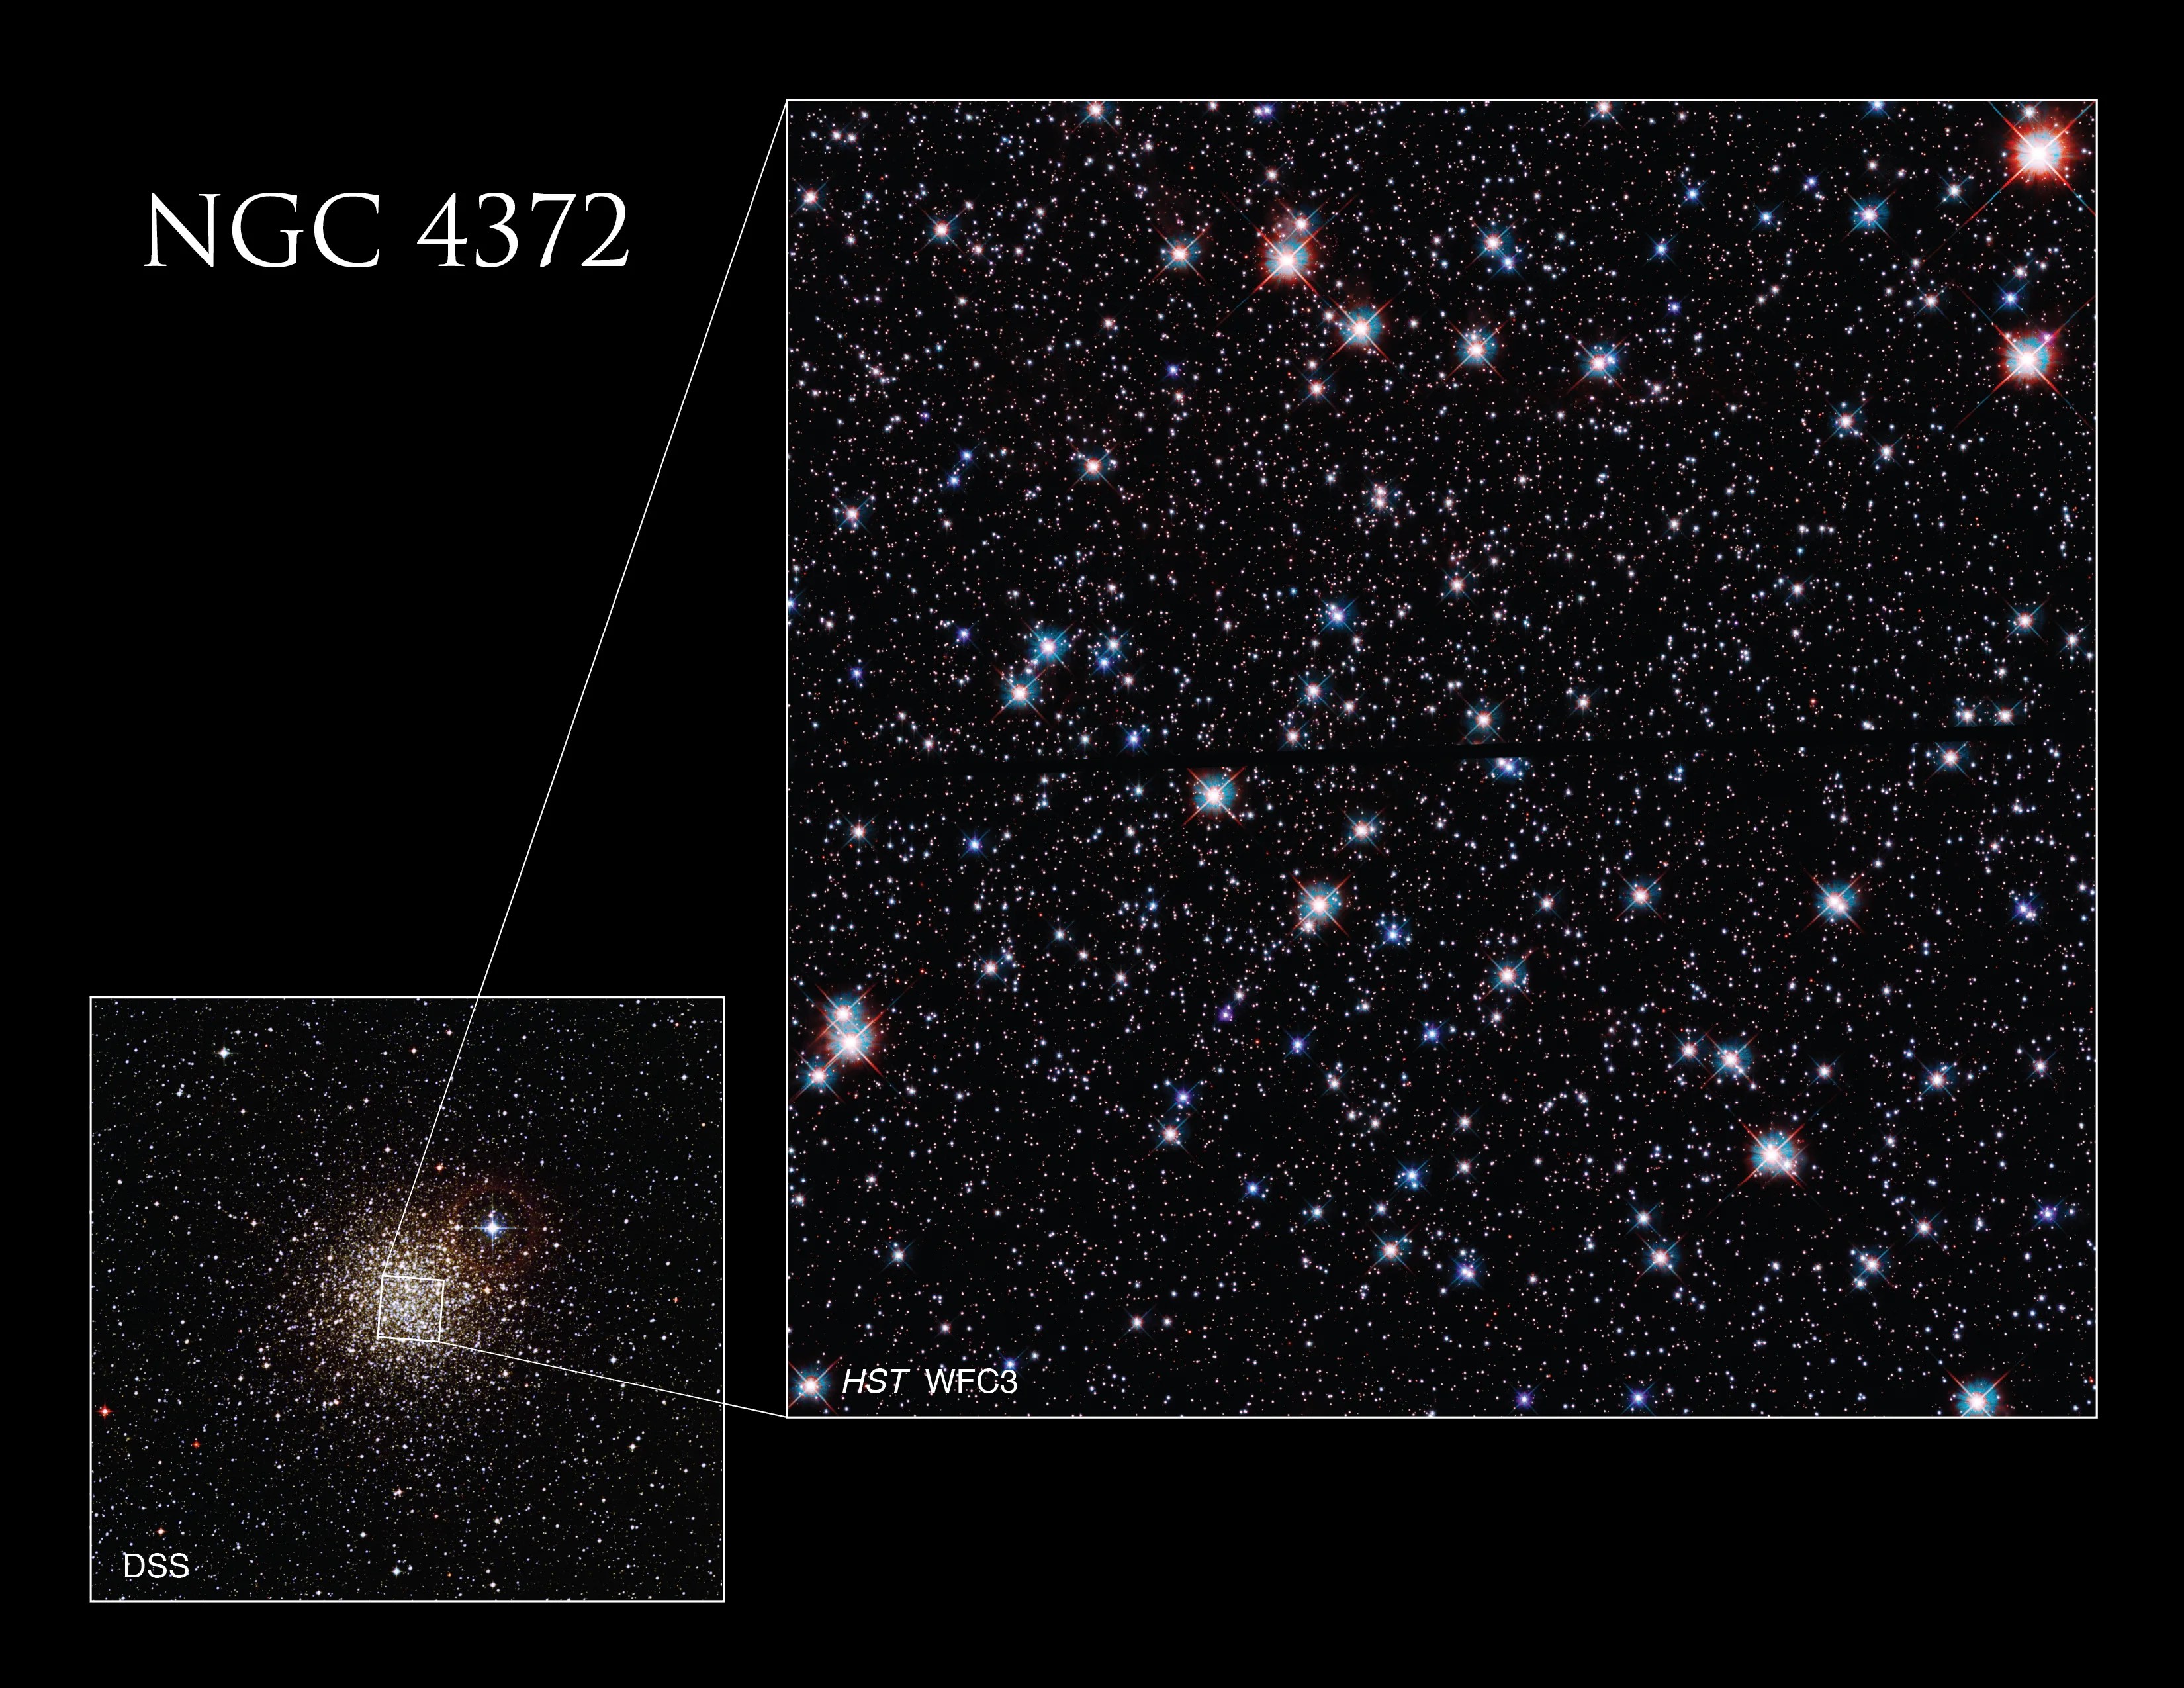 To the right is a ground-based image of Caldwell 108. To the right is the Hubble image of Caldwell 108. The image shows where the Hubble image is located within the ground-based image.